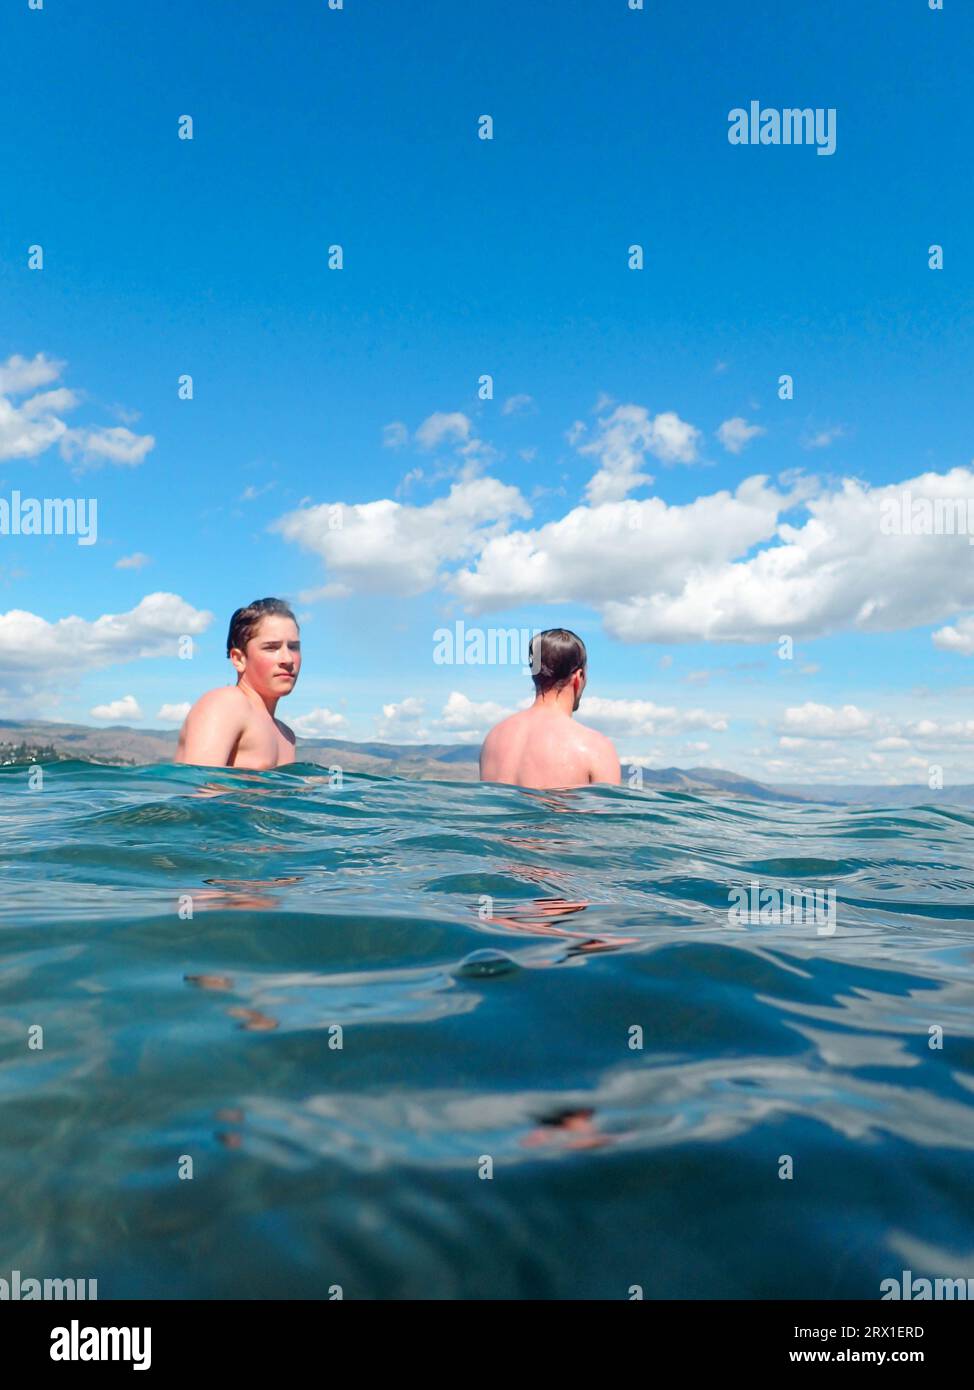 Two Boys In Lake With Crystal Clear Water and Blue Sky Stock Photo